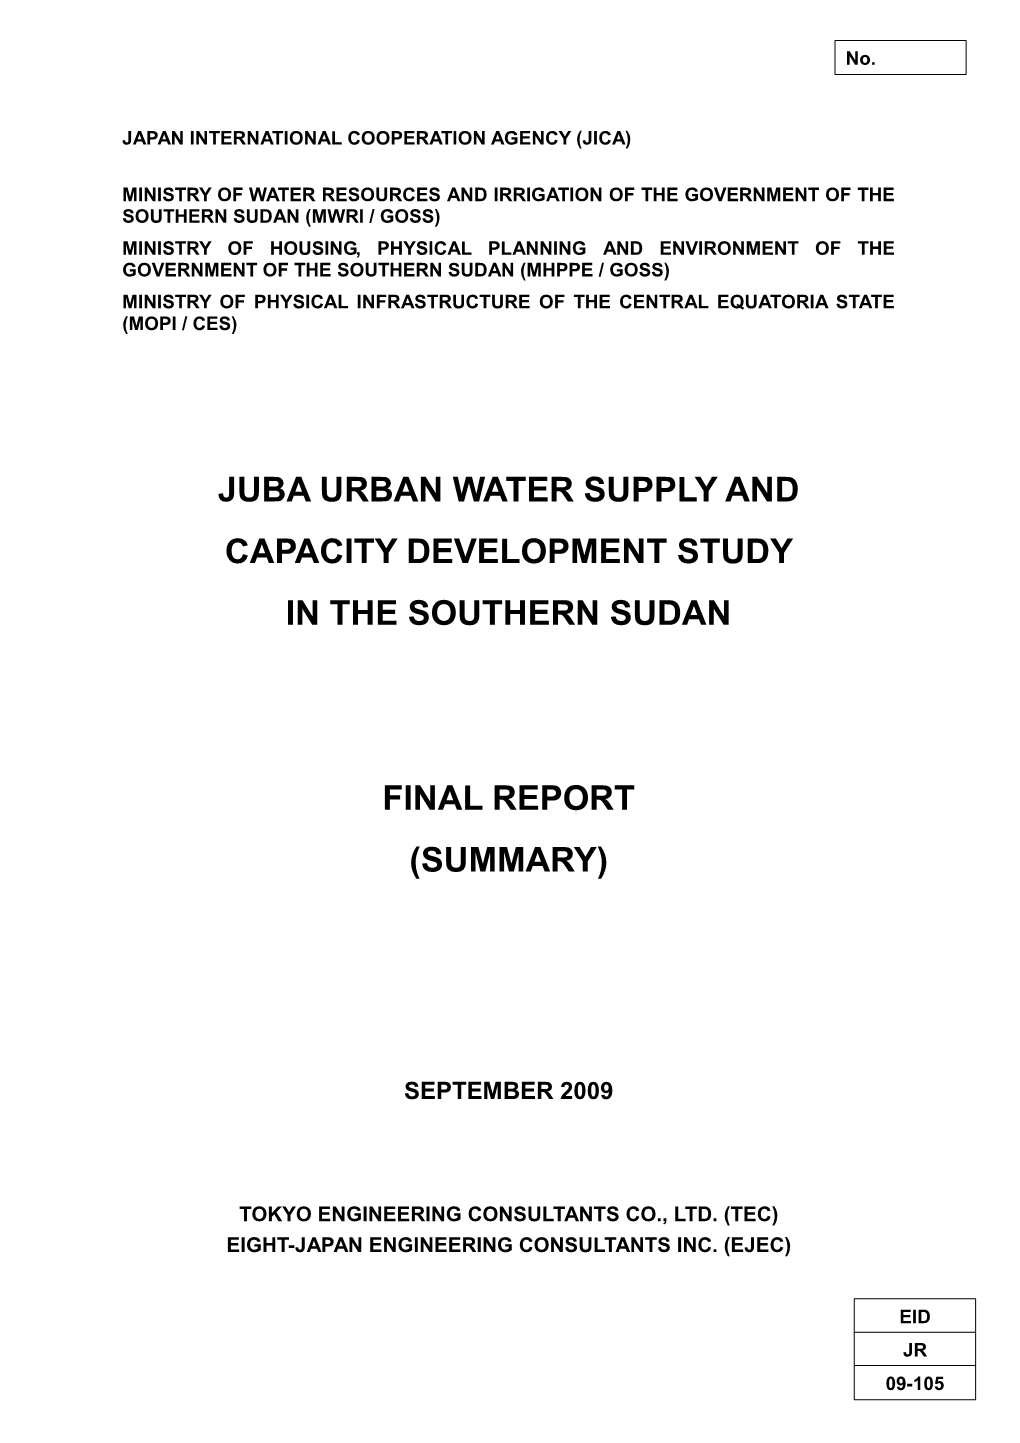 Juba Urban Water Supply and Capacity Development Study in the Southern Sudan